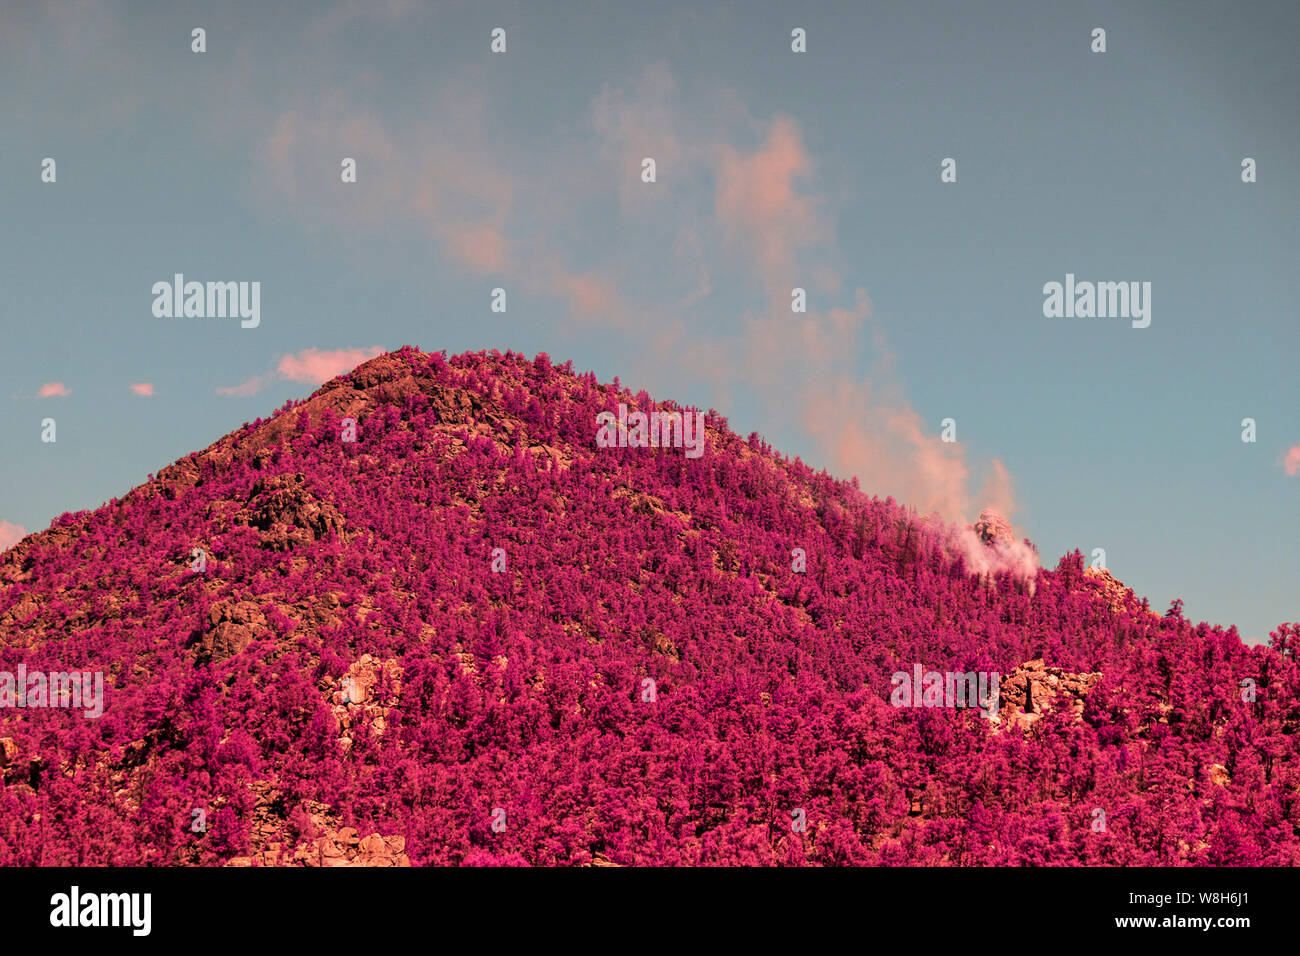 White smoke rising up into blue sky from forest fire. Infrared image. Stock Photo